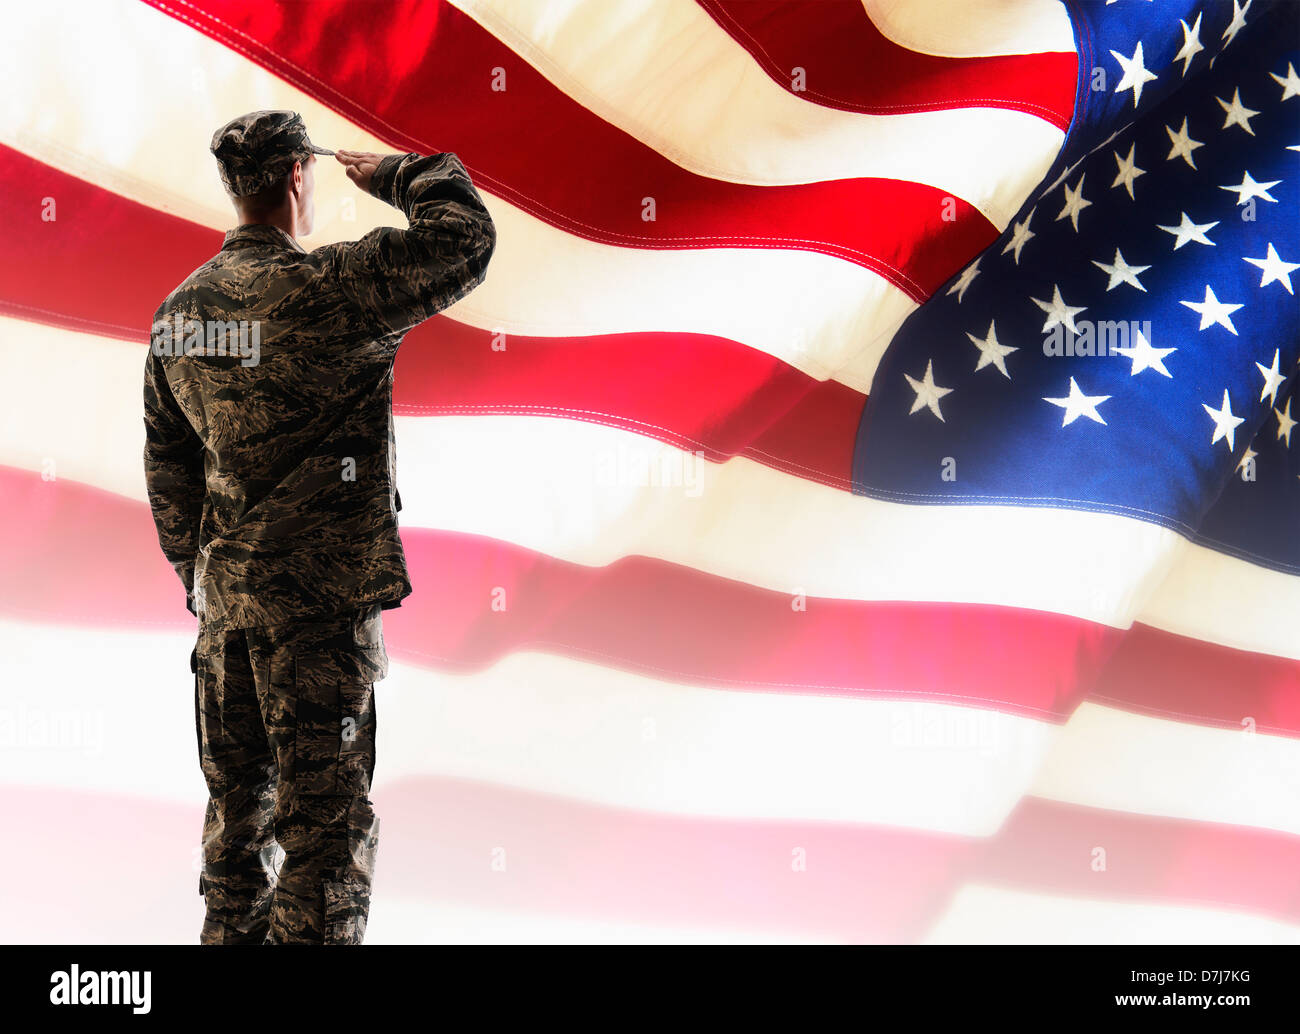 Army soldier saluting in front of American flag Stock Photo